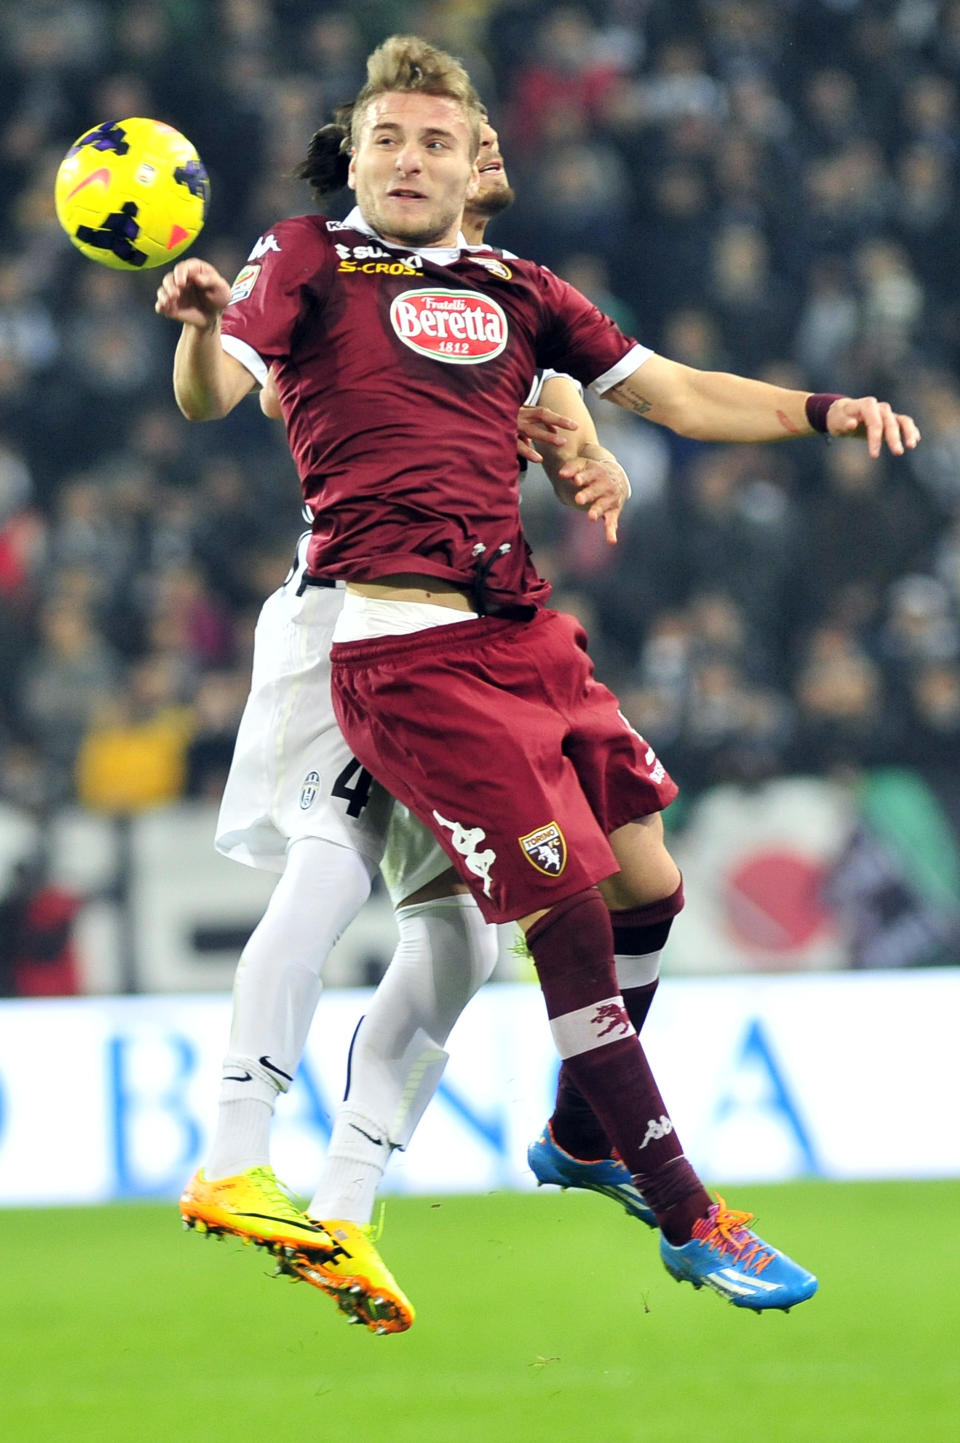 Torino forward Ciro Immobile challenges the ball with Juventus Martin Caceres, of Uruguay, during a Serie A soccer match between Juventus and Torino at the Juventus stadium, in Turin, Italy, Sunday, Feb. 23, 2014. (AP Photo/Massimo Pinca)